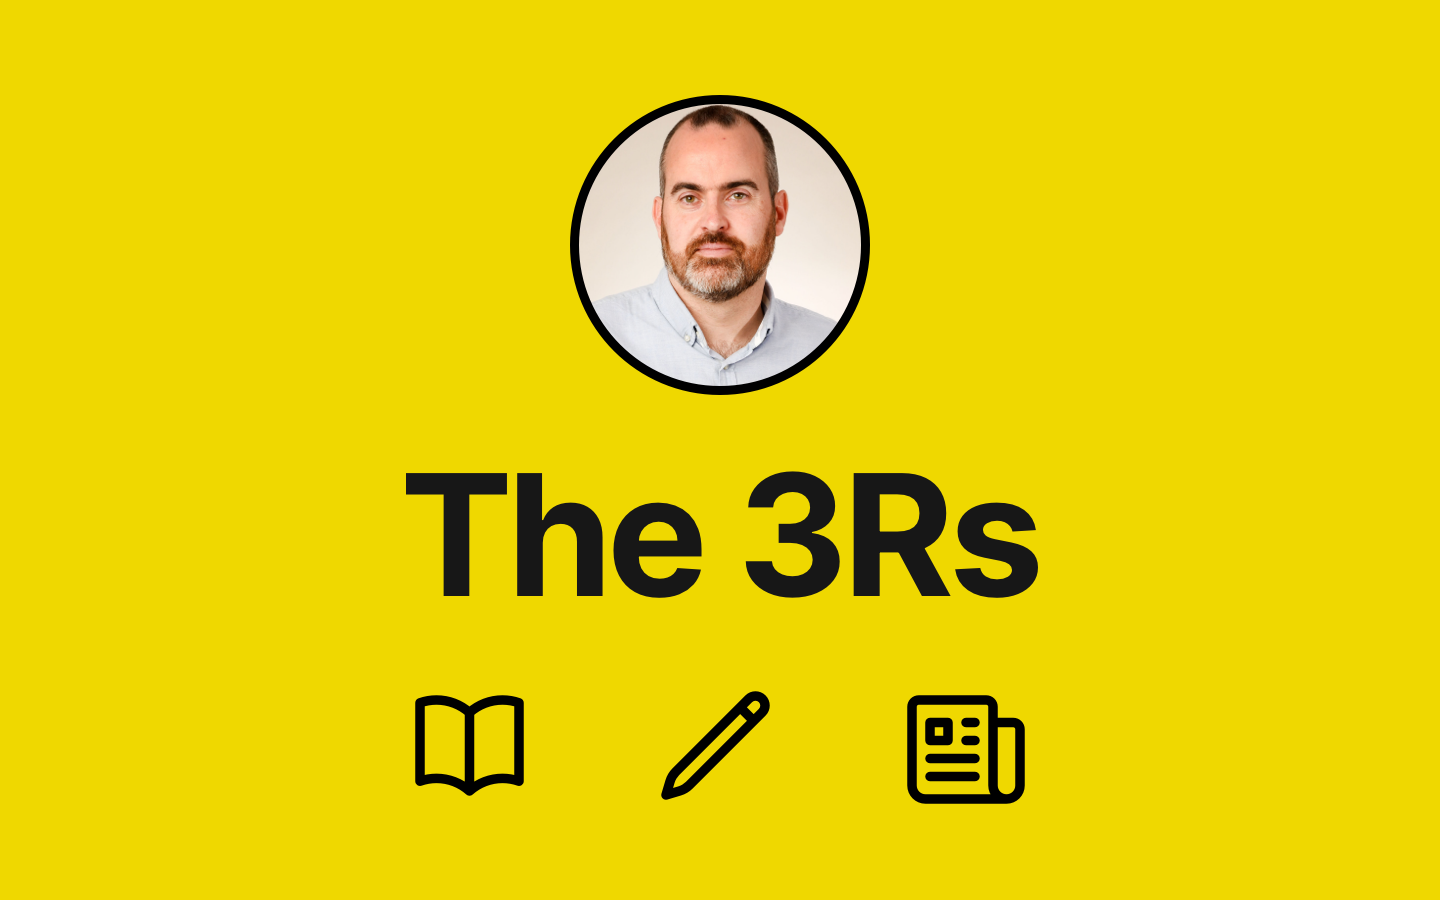 The 3Rs - Reading, writing, and research to be interested in #42 Post feature image